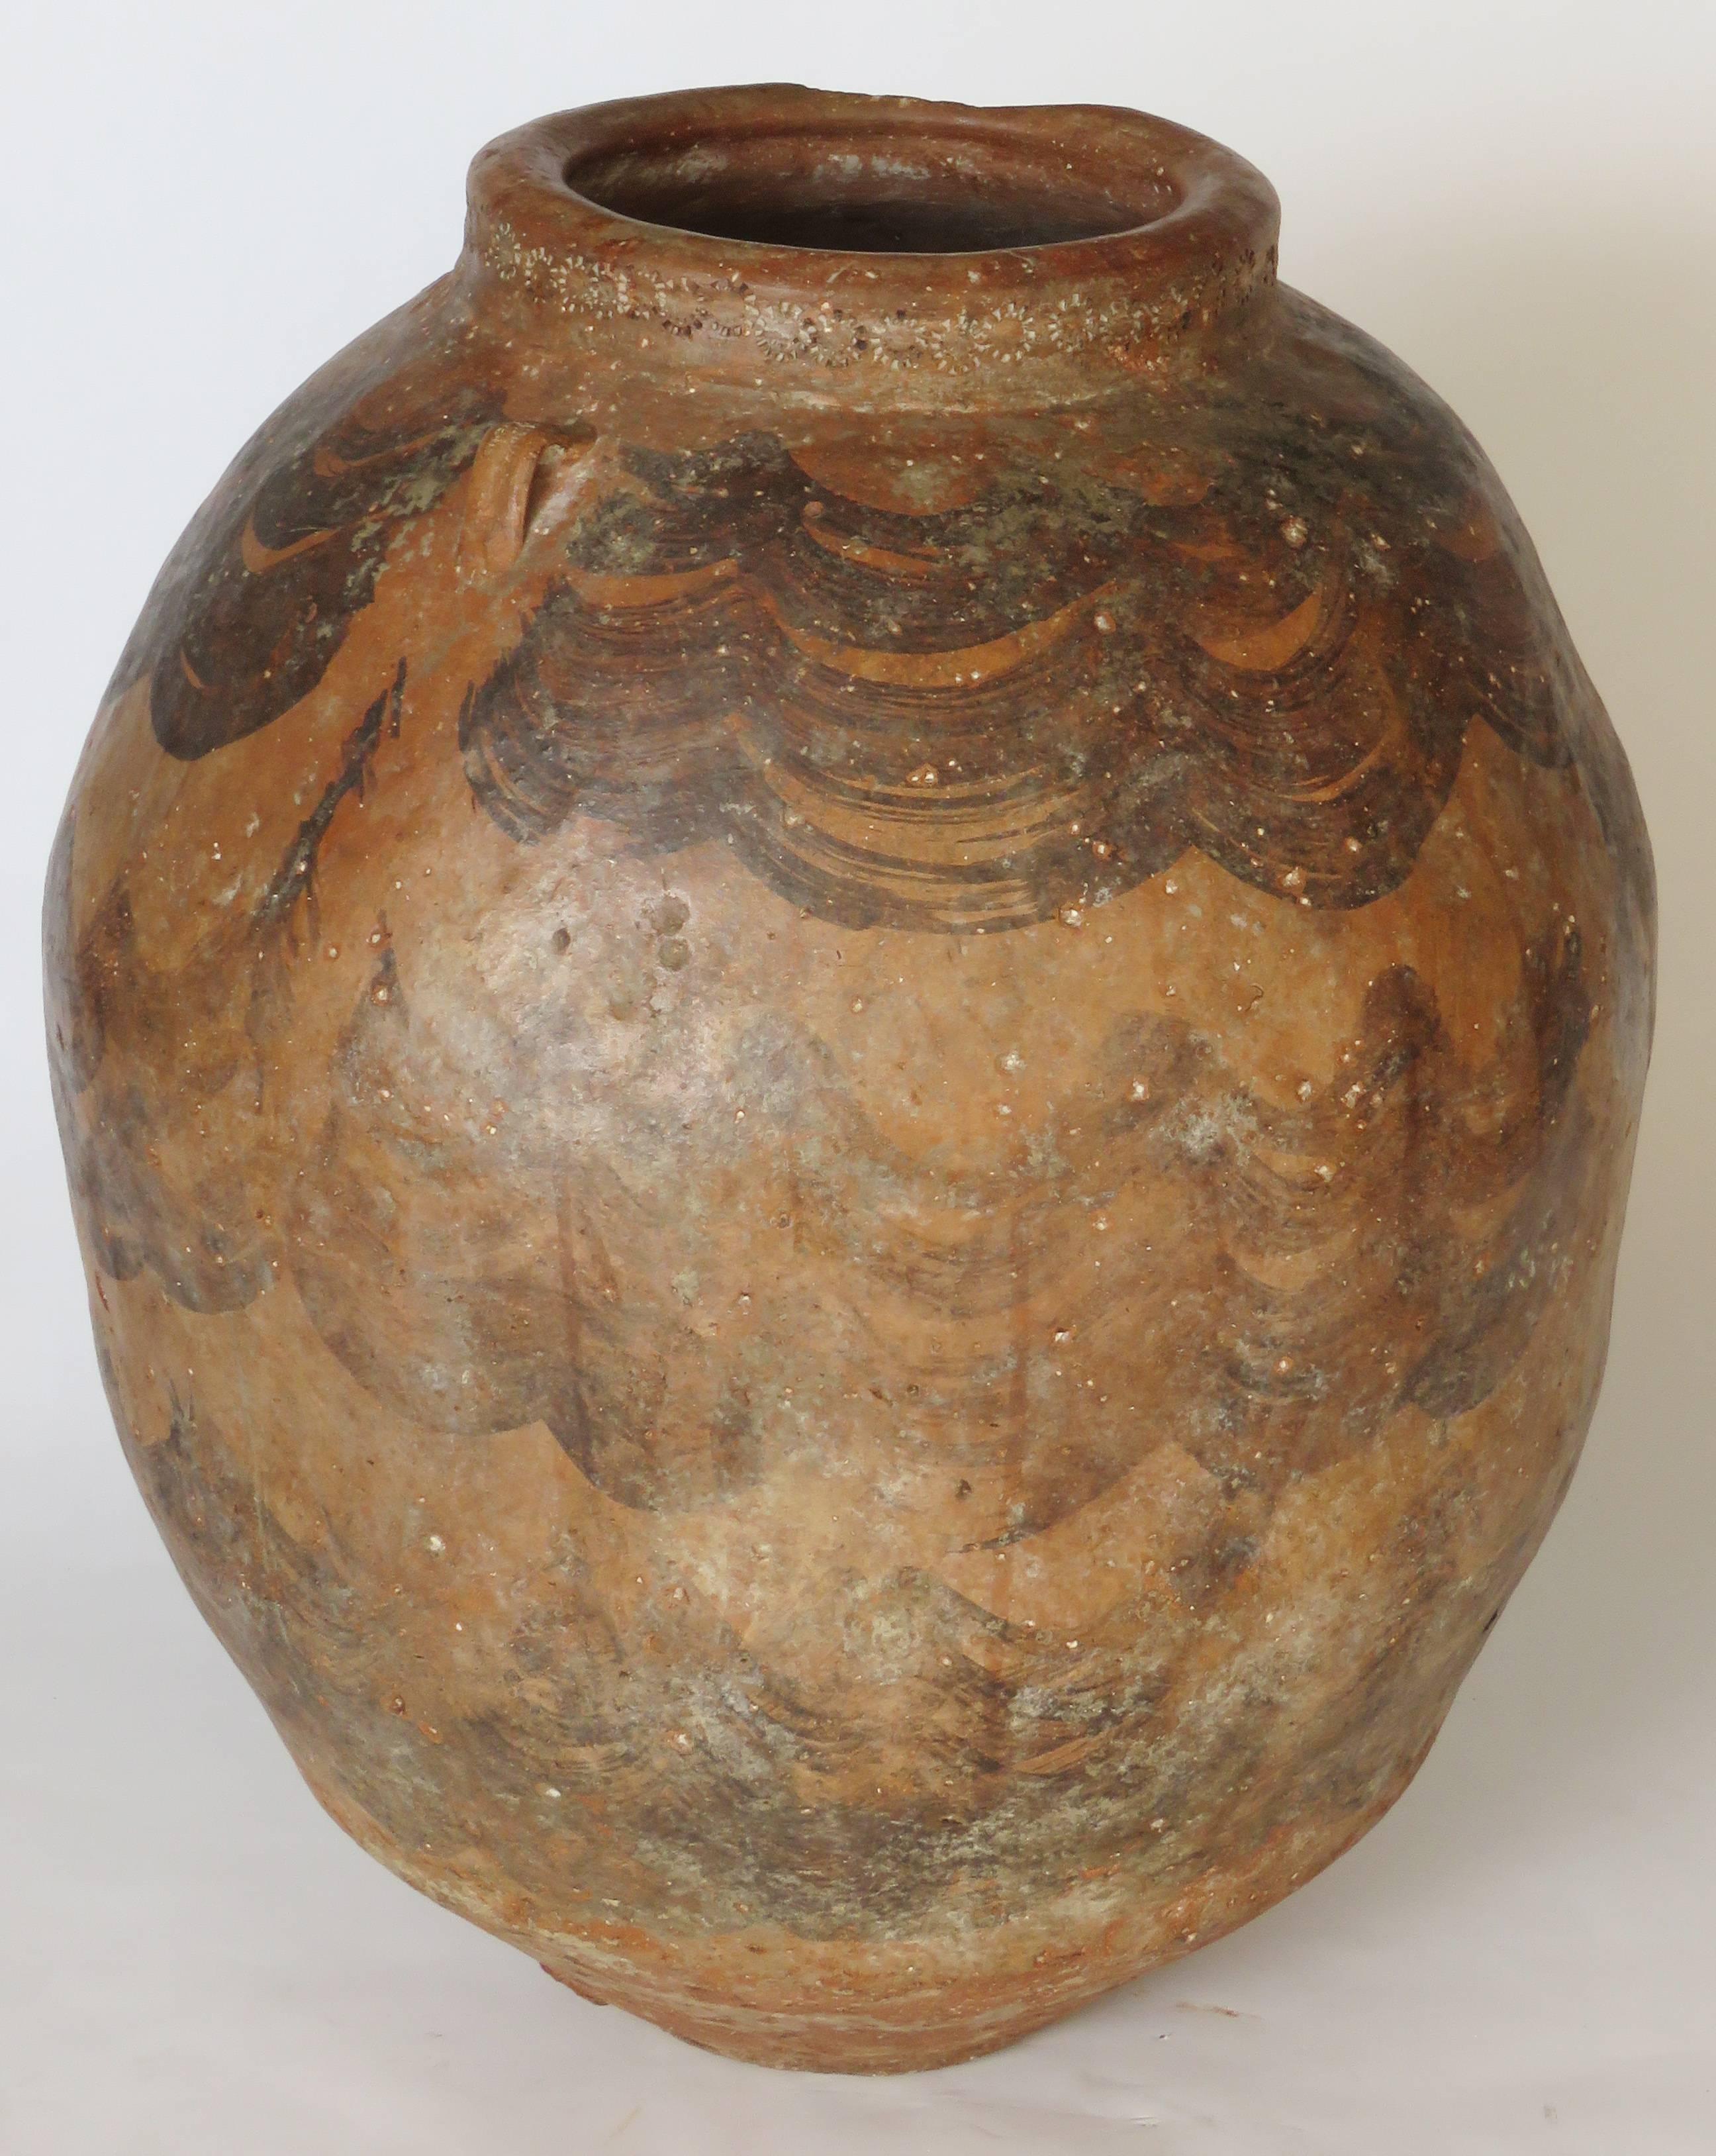 Hand coiled painted terracotta jar with handles. Mouth: 10